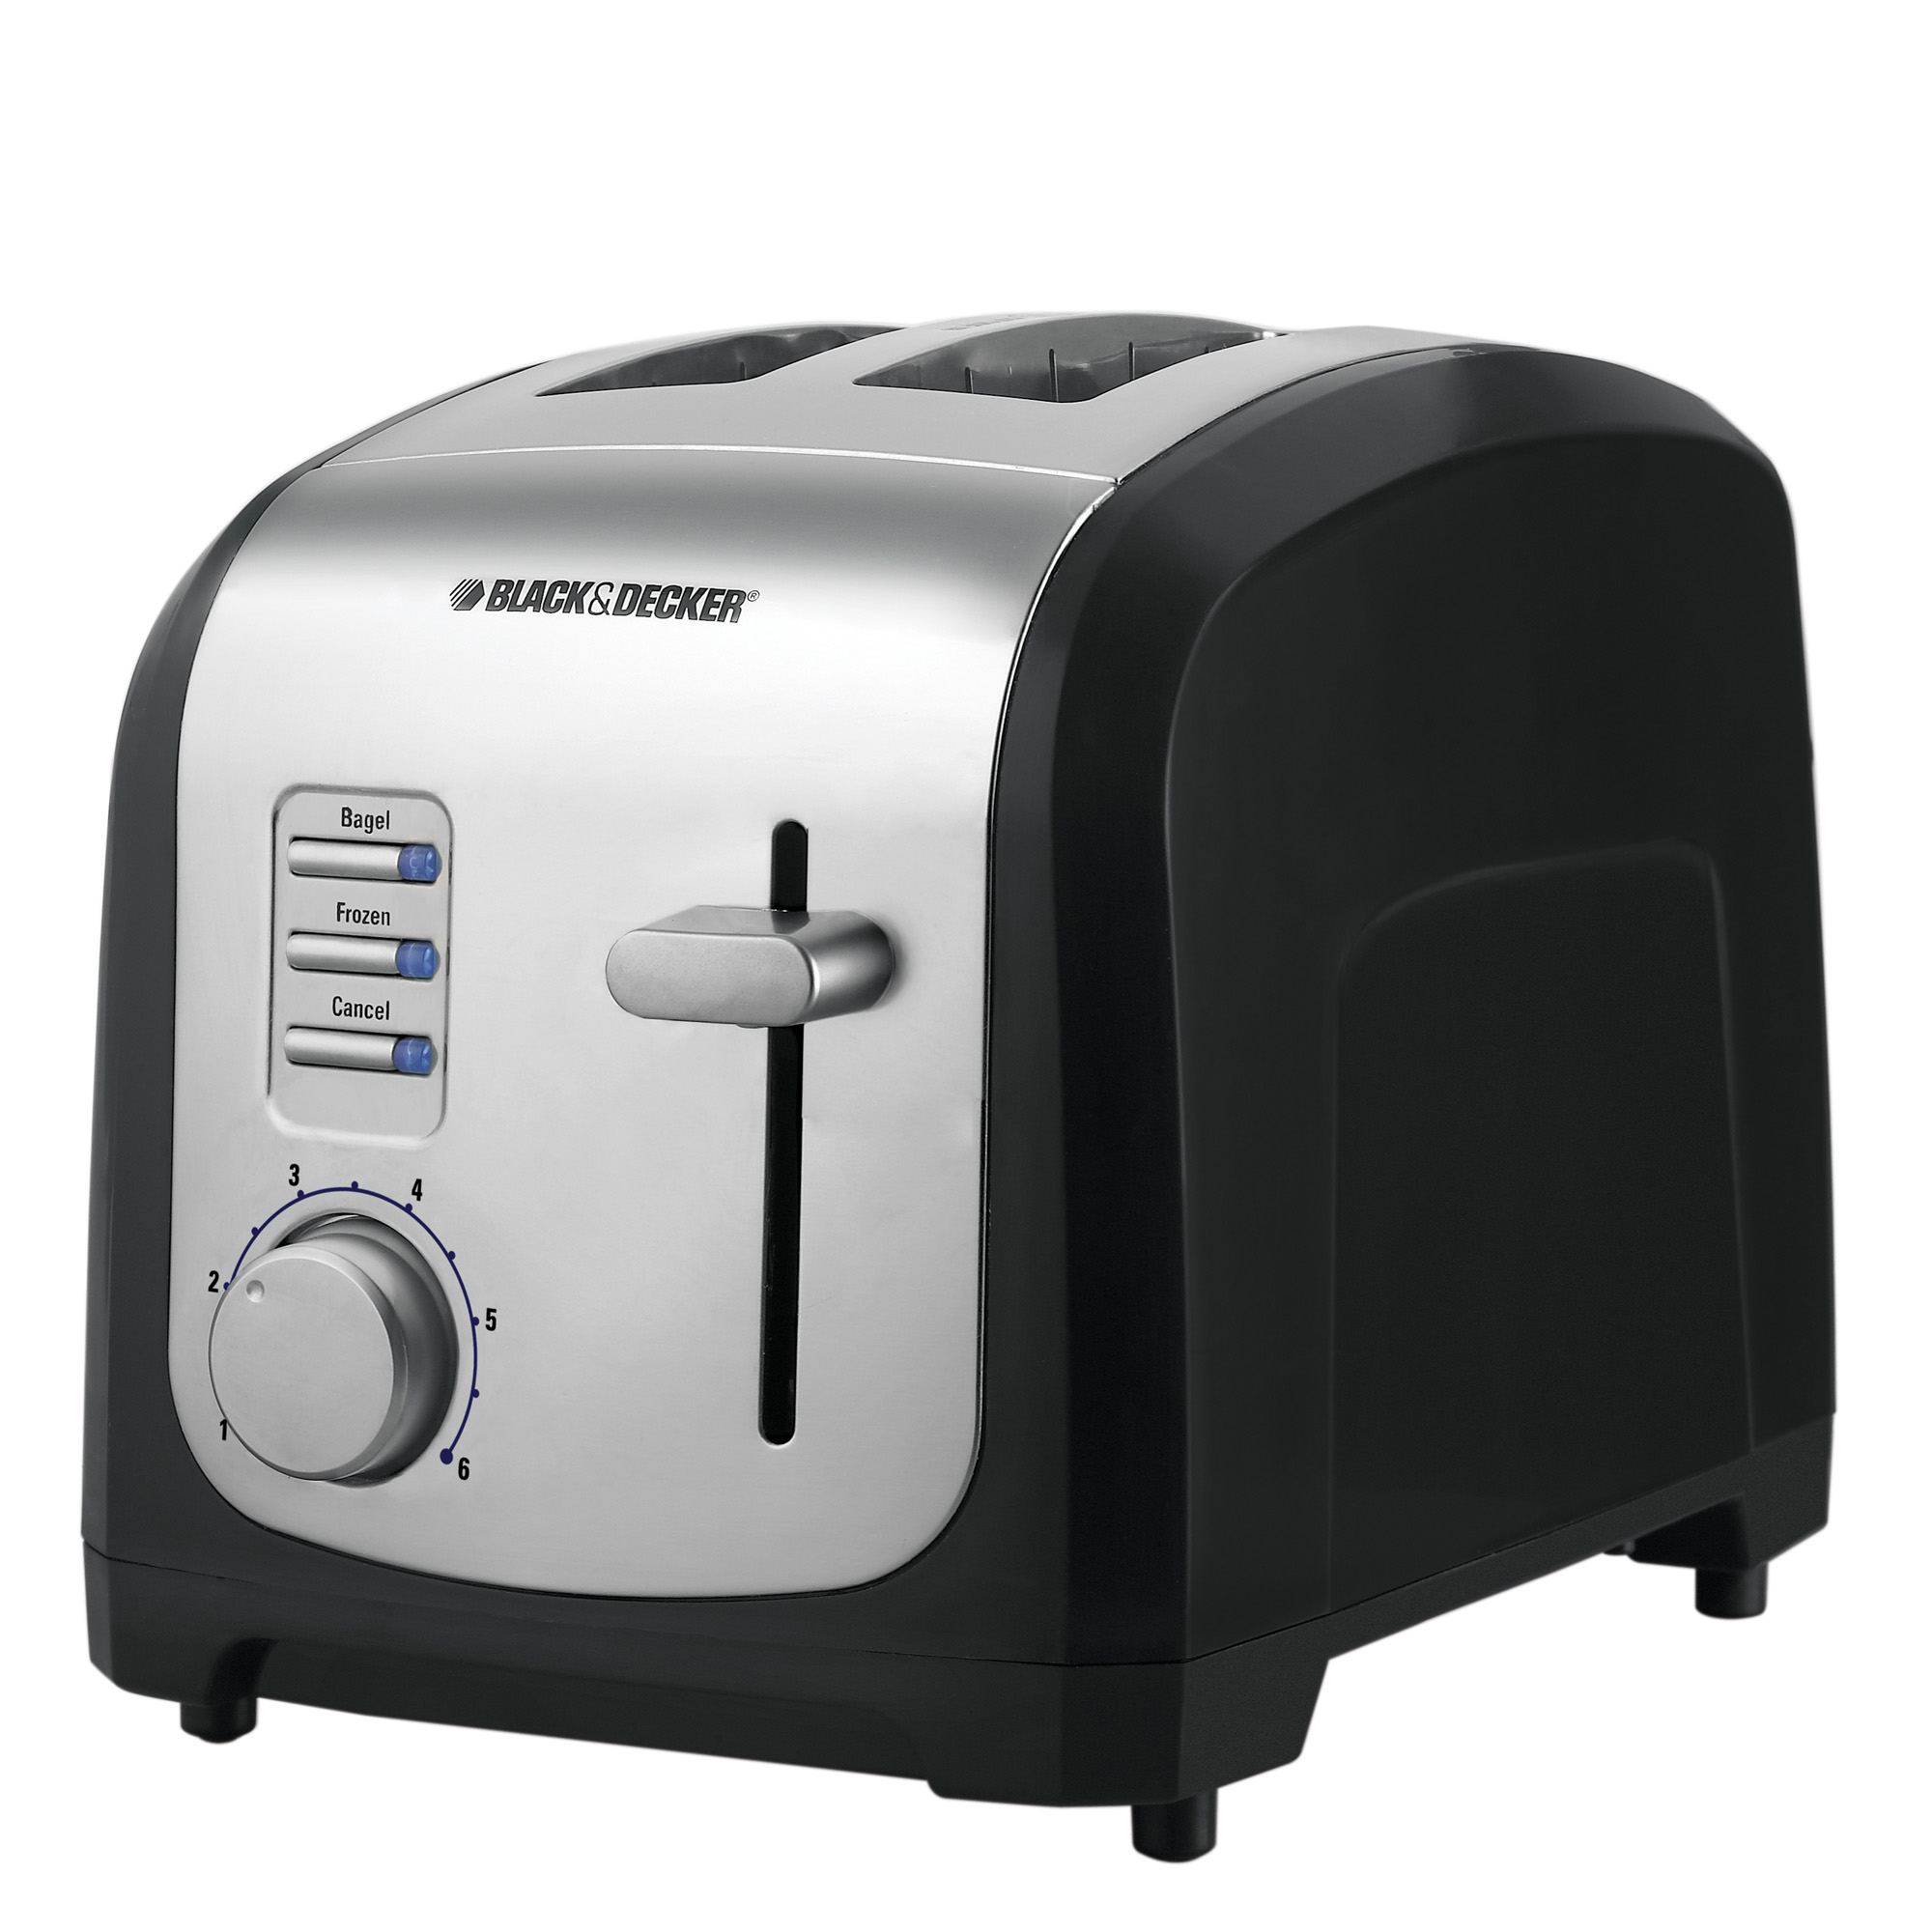 2-Slice Toaster with bowning options | T2030